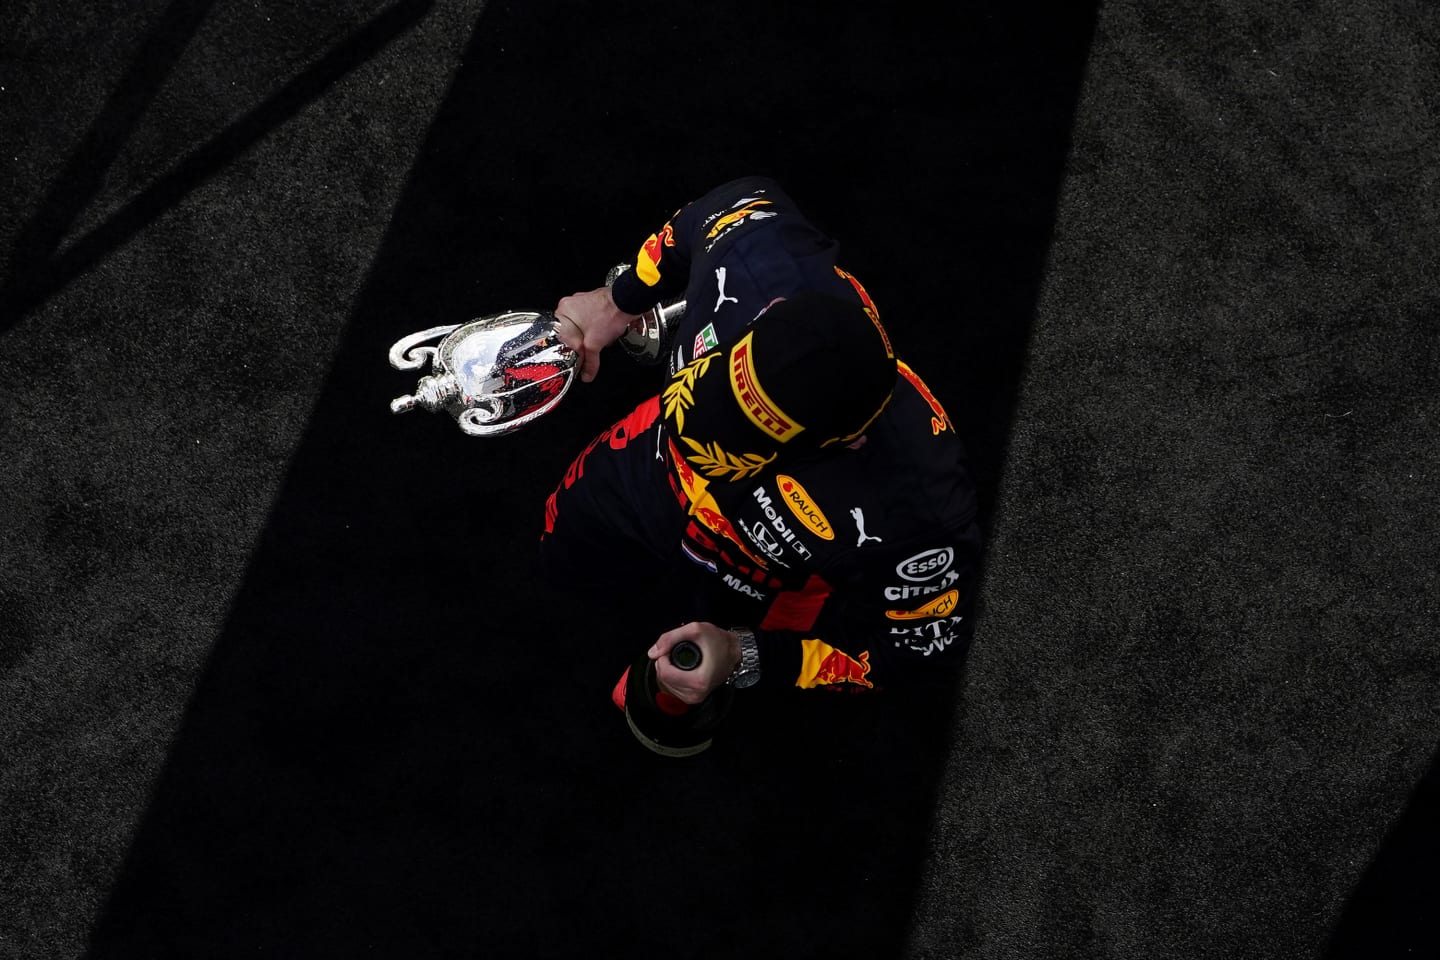 NORTHAMPTON, ENGLAND - AUGUST 02: Runner-up Max Verstappen of Netherlands and Red Bull Racing celebrates on the podium during the F1 Grand Prix of Great Britain at Silverstone on August 02, 2020 in Northampton, England. (Photo by Will Oliver/Pool via Getty Images)